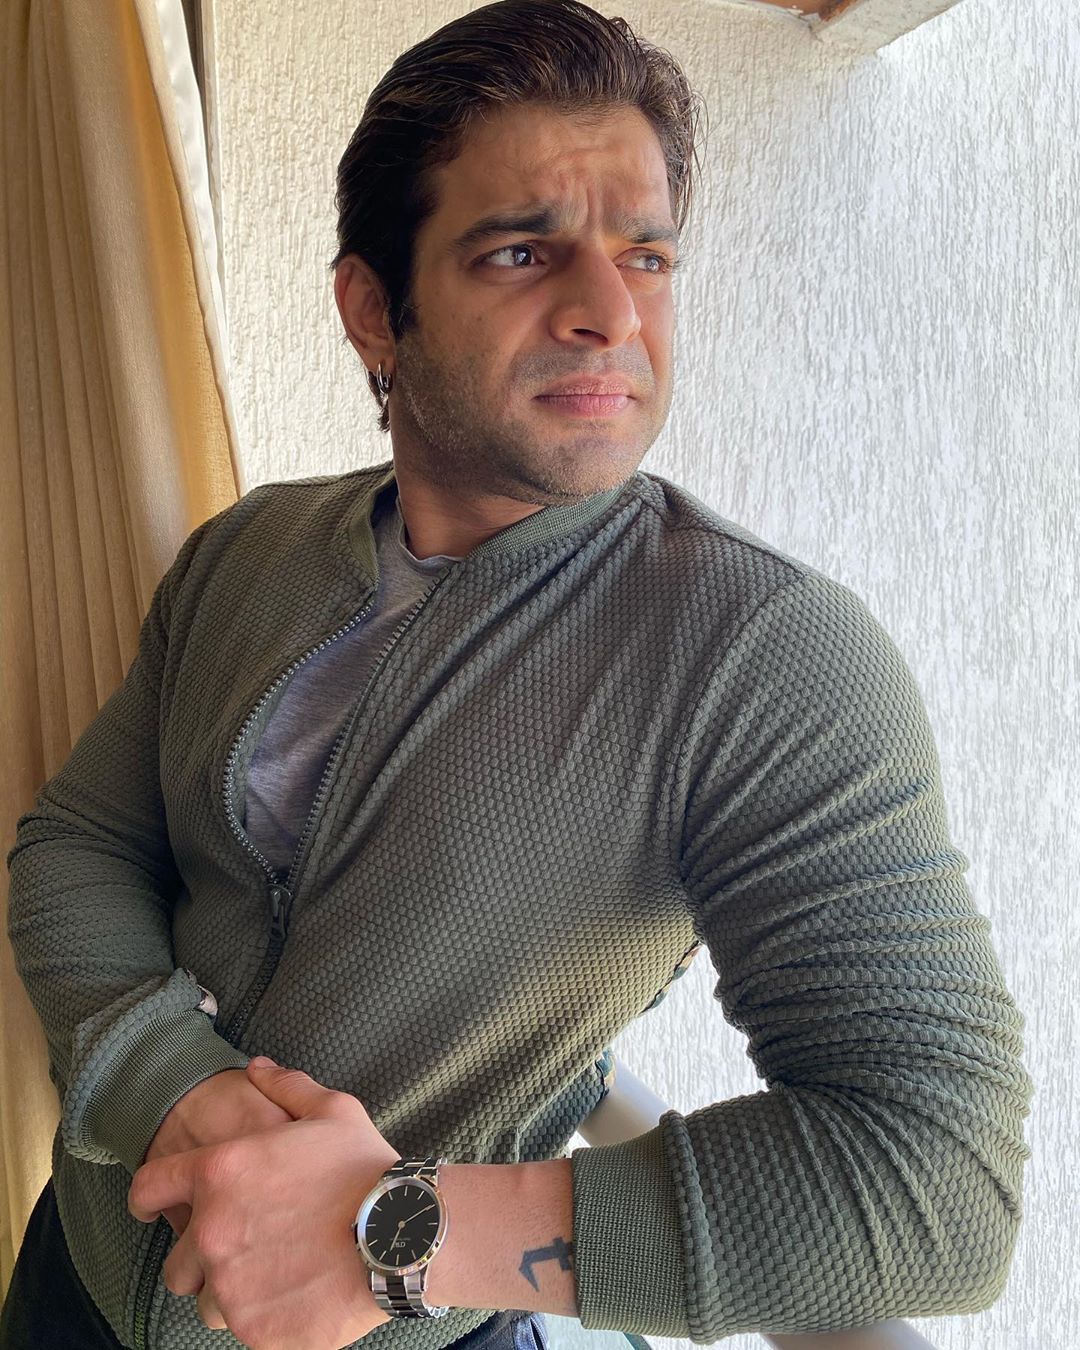 Bigg Boss 14: Karan Patel Shuts Down Rumours Of Participating In The Salman Khan Show Days Ahead Of The Premiere